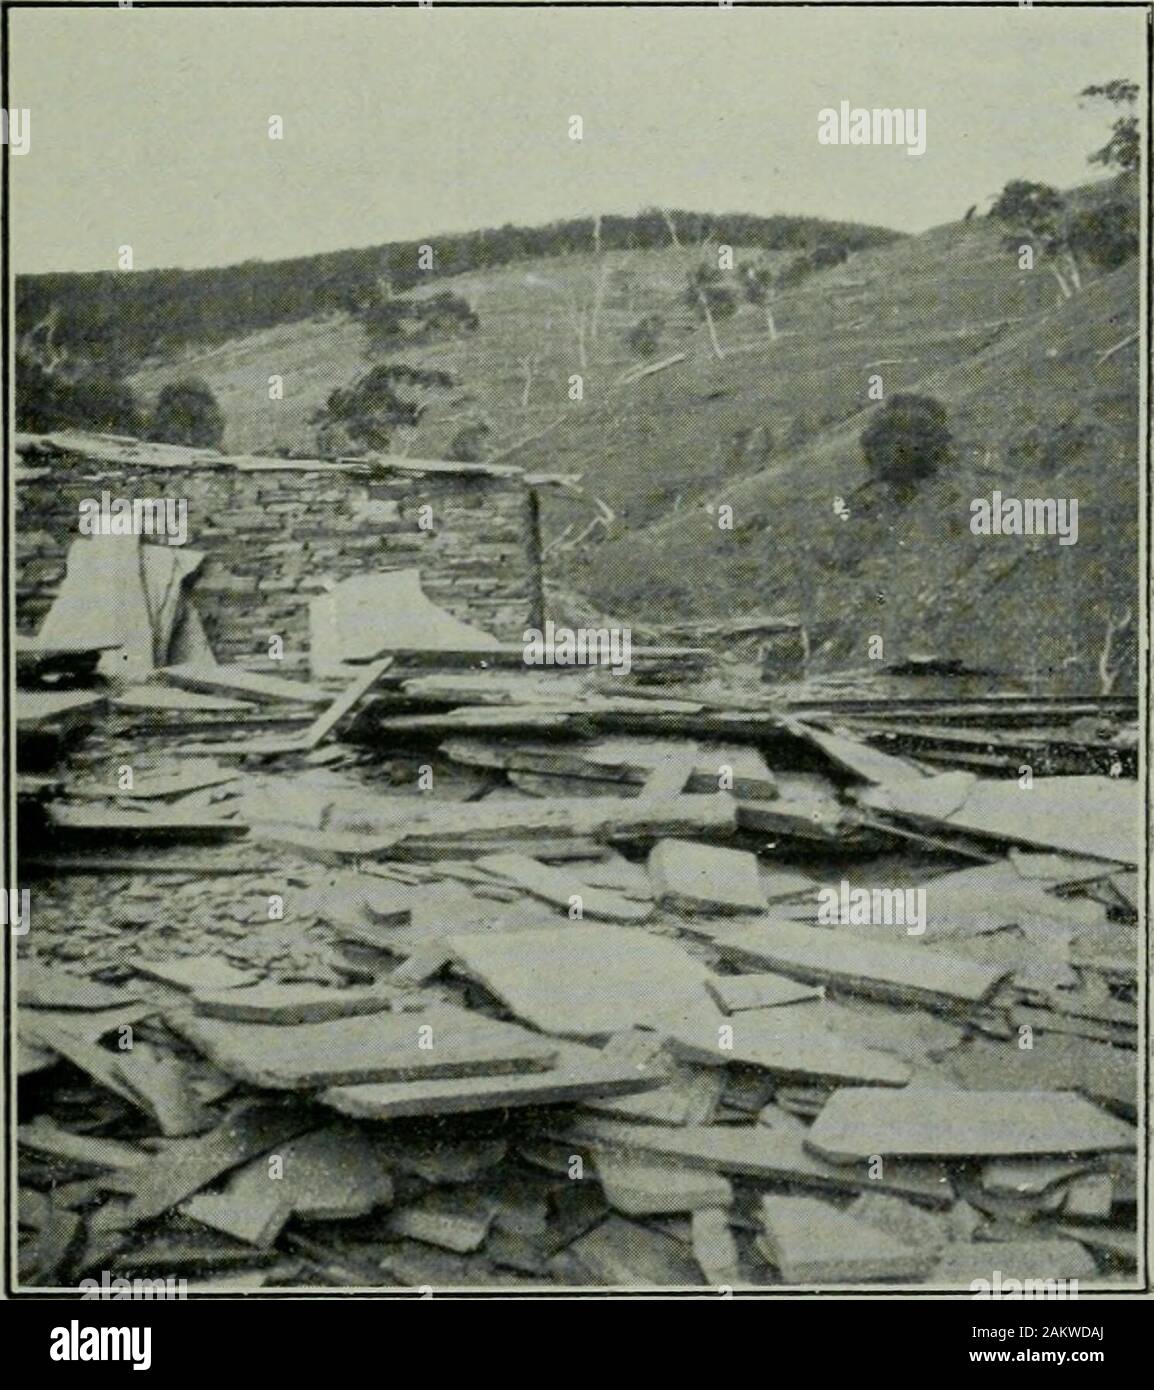 Mining review . MARTINS QUARRY.. Photos, by Government Geologist.BANGOR QUARRY. Faces page 32.] 33 about 45ft. S. from No. 1, has been sunk 18ft. vertically. At that depth it holedthrough to the back of the S. drive. Over the drive between the two shafts a fairamount of stoping has been done in a ferruginous ore body 3ft. to 6ft. wide, carryinggold. Several parcels of ore taken from the workings have been treated atthe Government Cyanide Works, Petersburg, yielding from 14dwts. to 15dwts.of gold per ton. At a point 43ft. in the S. drive a winze is in progress, and is down17ft. The ore-bearing Stock Photo